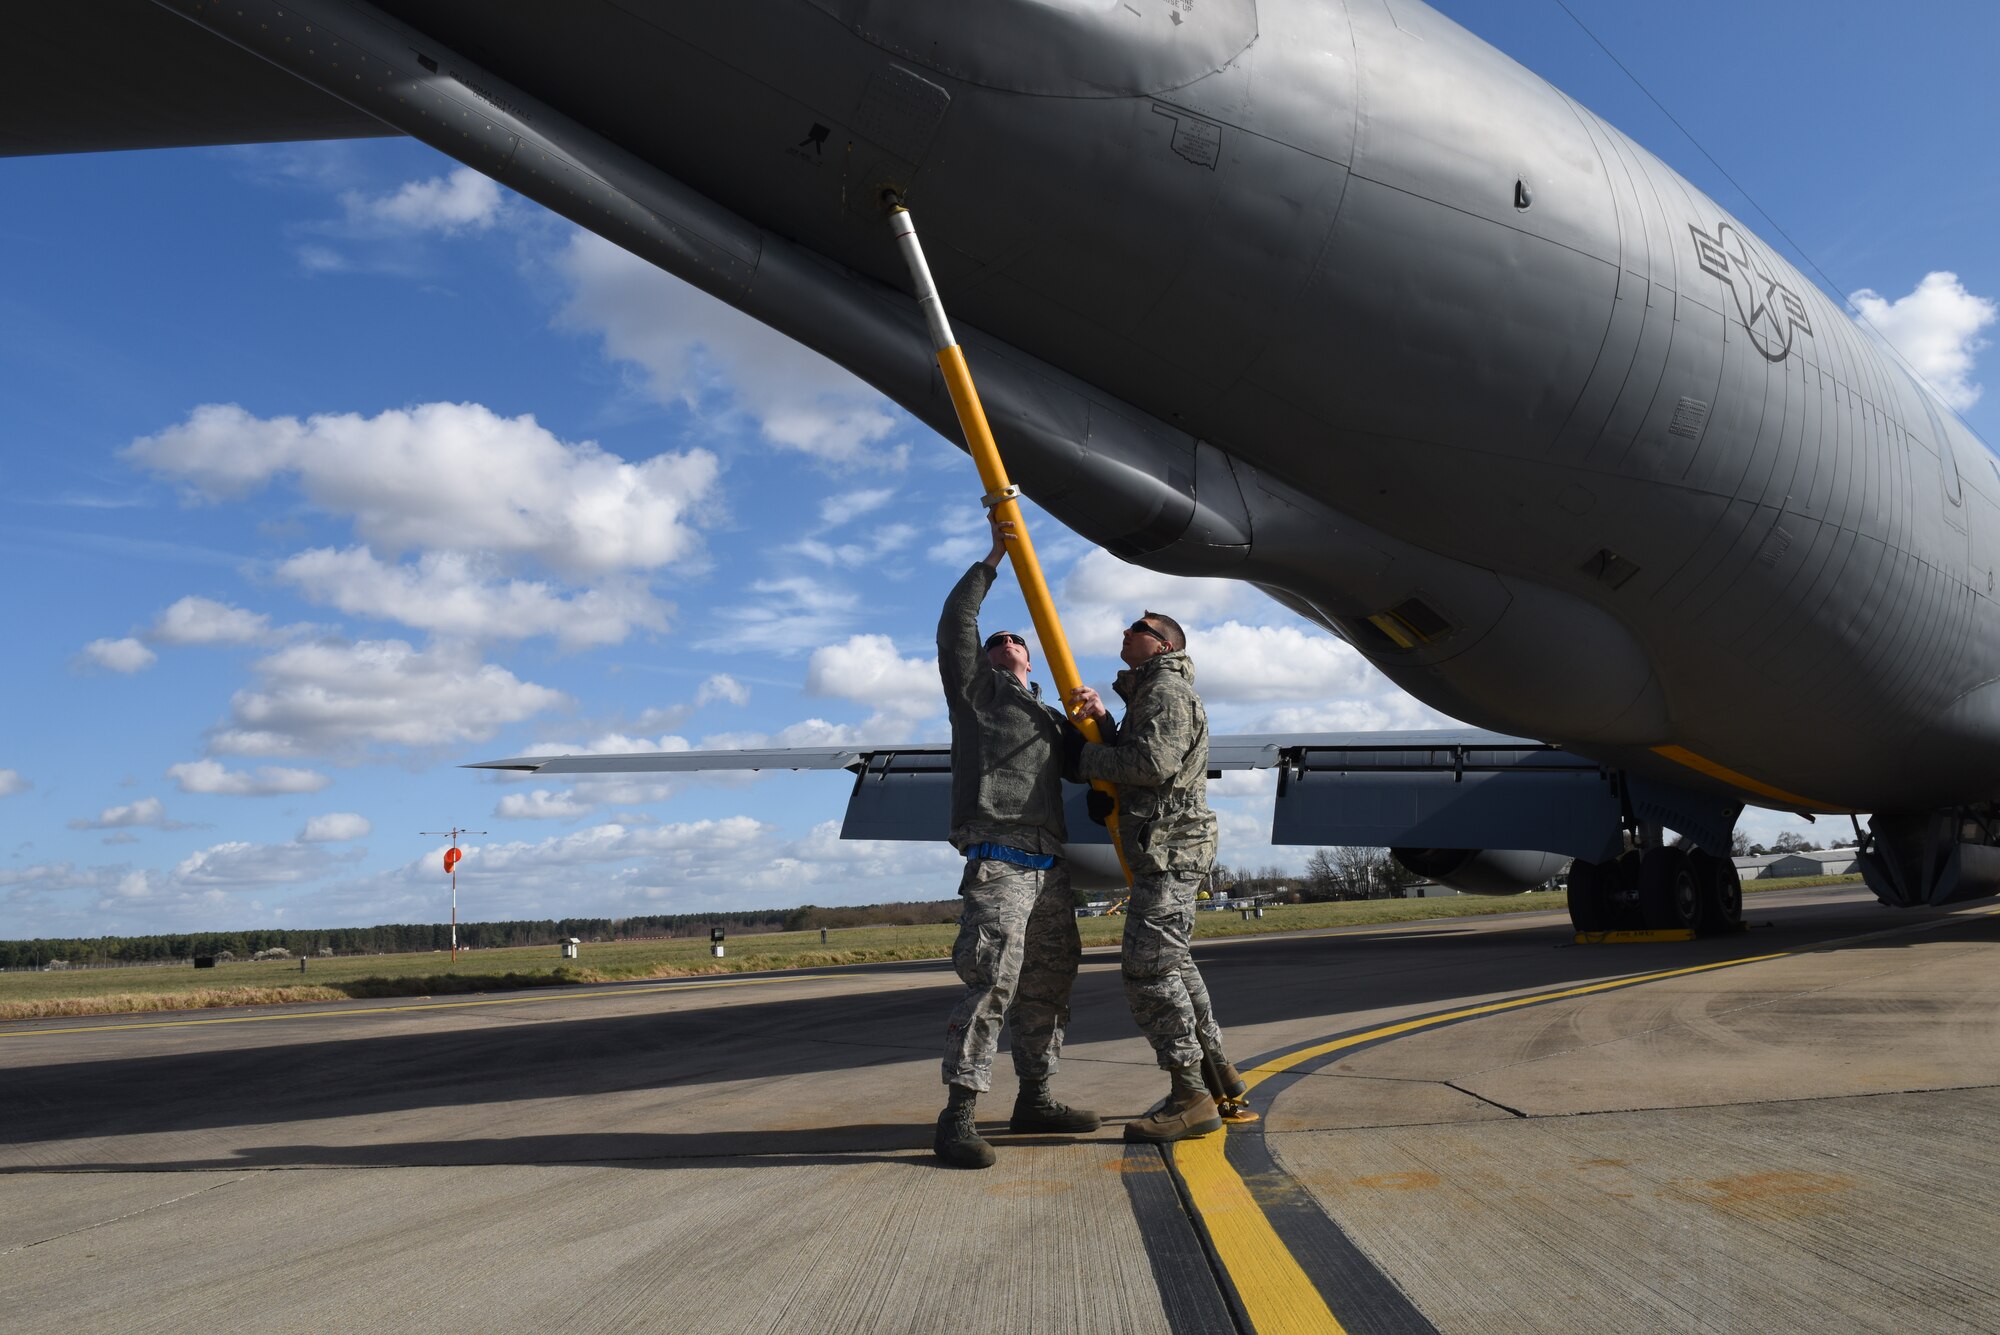 U.S. Air Force Airman 1st Class Brenden Hurston and U.S. Air Force Staff Sgt. Lee Buehrer, 100th Aircraft Maintenance Squadron crew chiefs, install a tail stand on a KC-135 Stratotanker after recovering the aircraft at RAF Mildenhall, England, March 5, 2019. A tail stand is installed on a KC-135 for cargo loading operations or fuel servicing. (U.S. Air Force photo by Senior Airman Luke Milano)